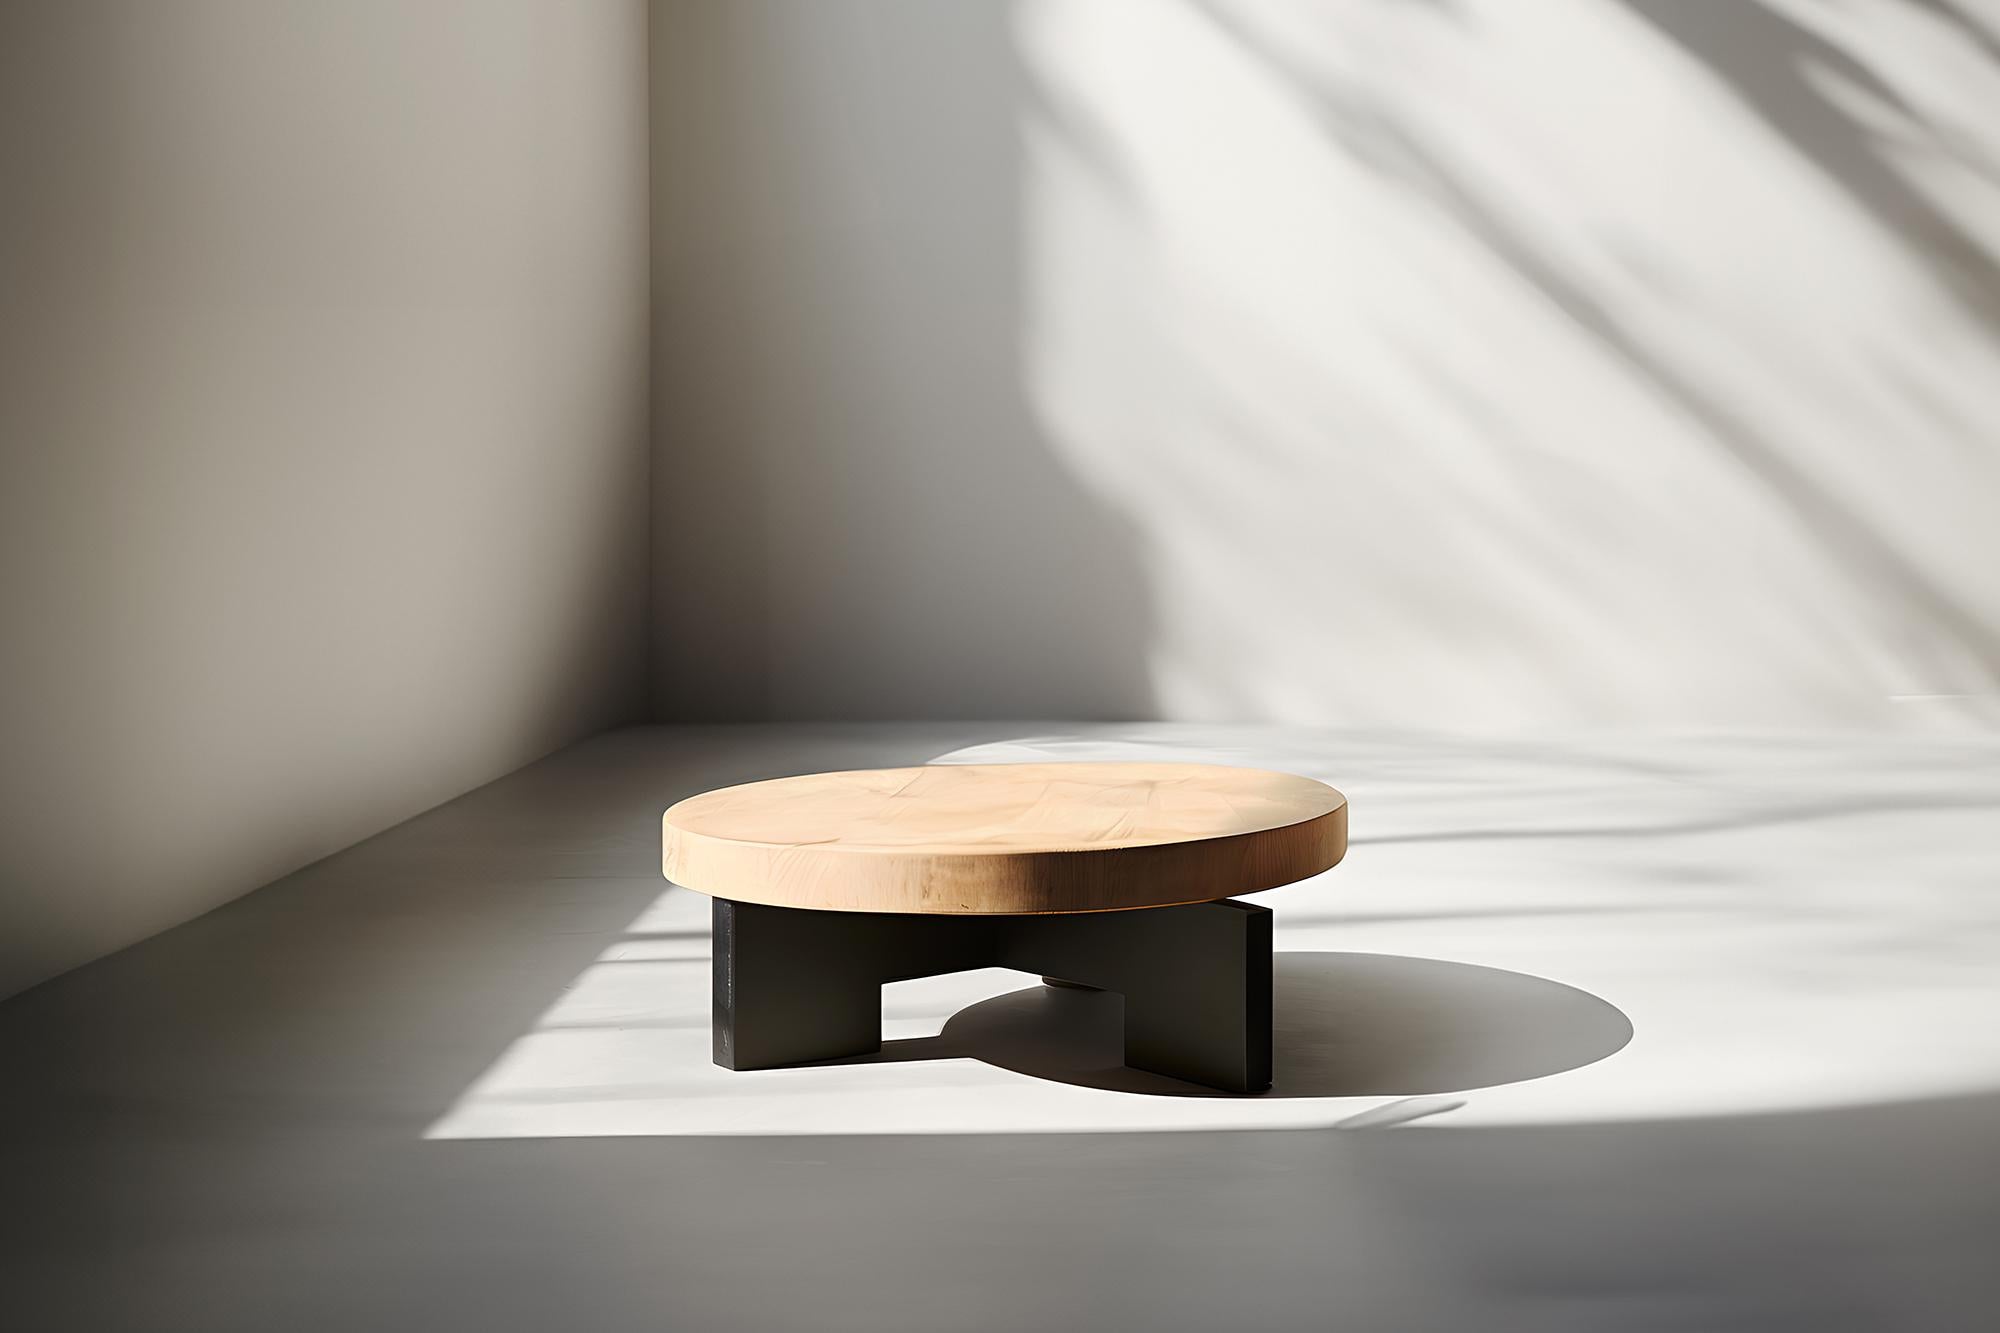 Round Top Fundamenta Table 61 Abstract Oak, Sleek Design by NONO


Sculptural coffee table made of solid wood with a natural water-based or black tinted finish. Due to the nature of the production process, each piece may vary in grain, texture,